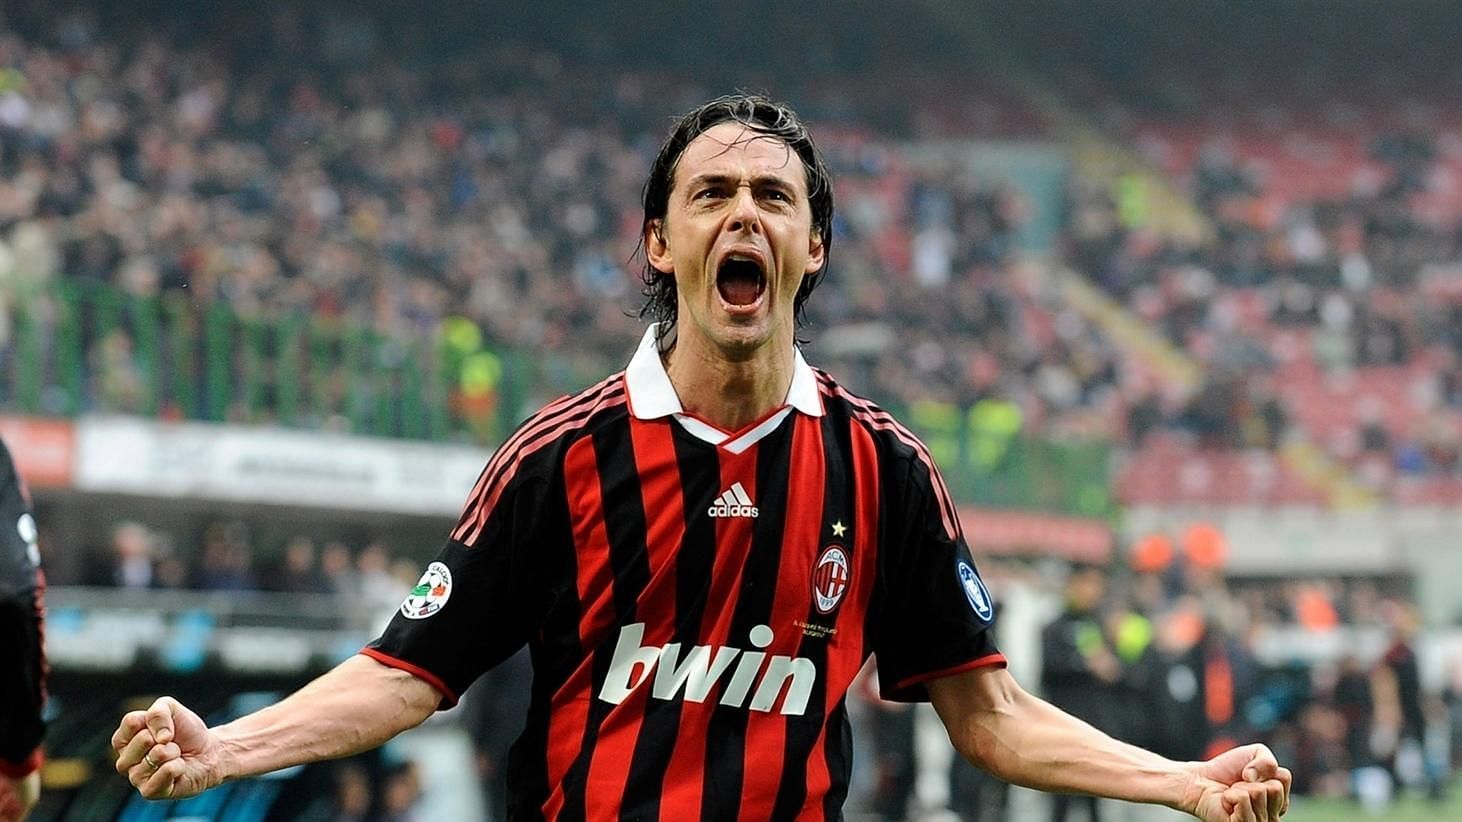 Filippo inzaghi won 2 UCL titles with AC Milan